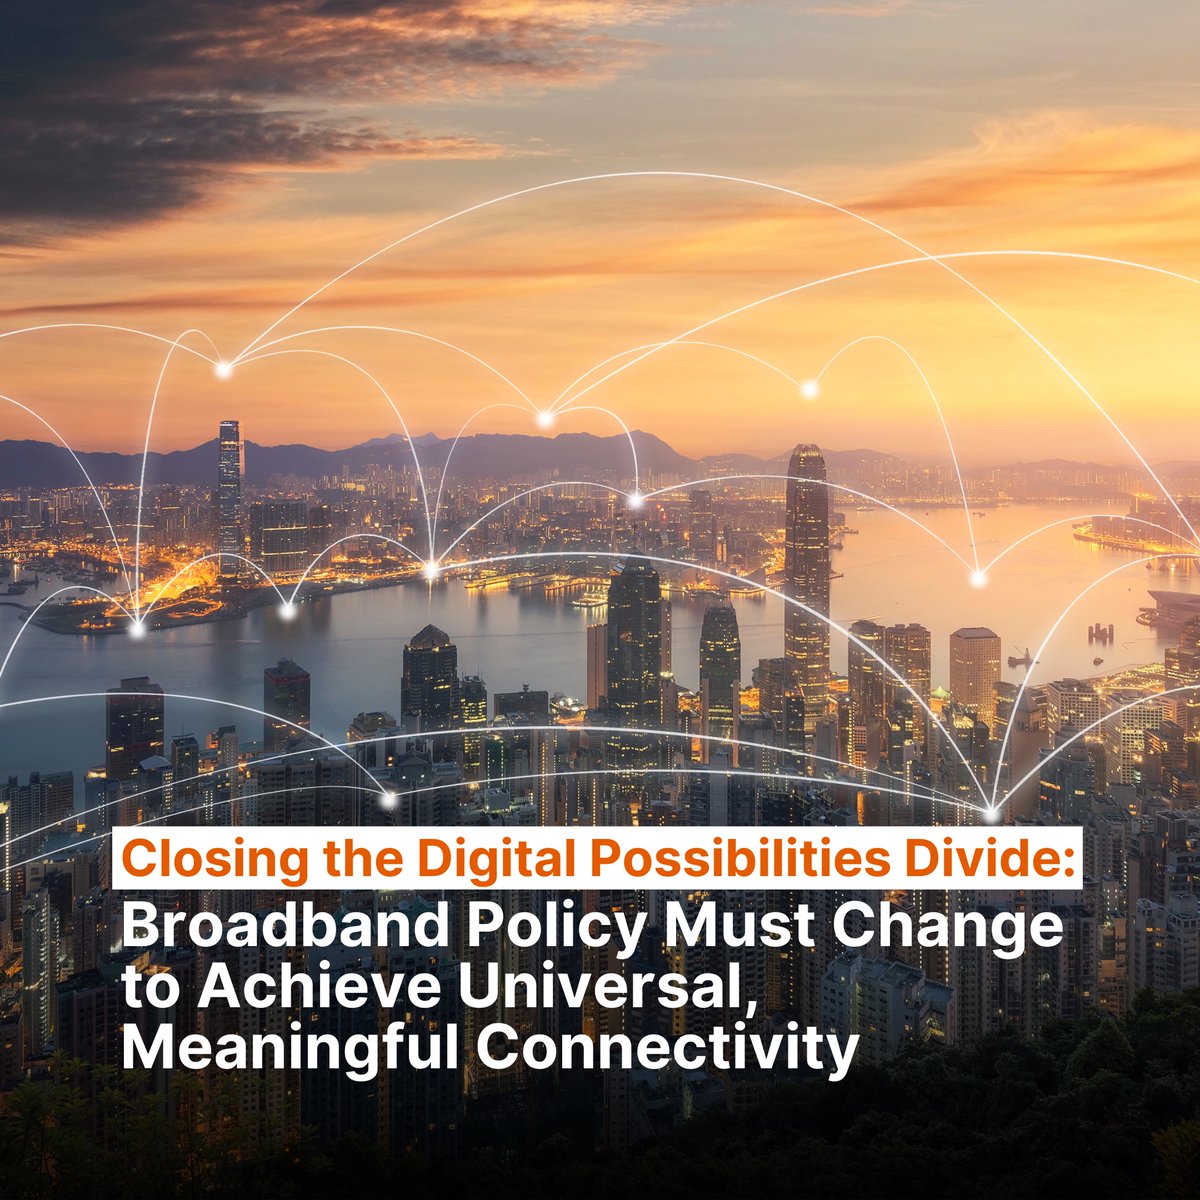 Infrastructure remains an issue in several parts of the world. However, broadband policies must consider the other barriers to universal, meaningful connectivity beyond just infrastructure. Here’s how. gdip.ngo/3V65KuL